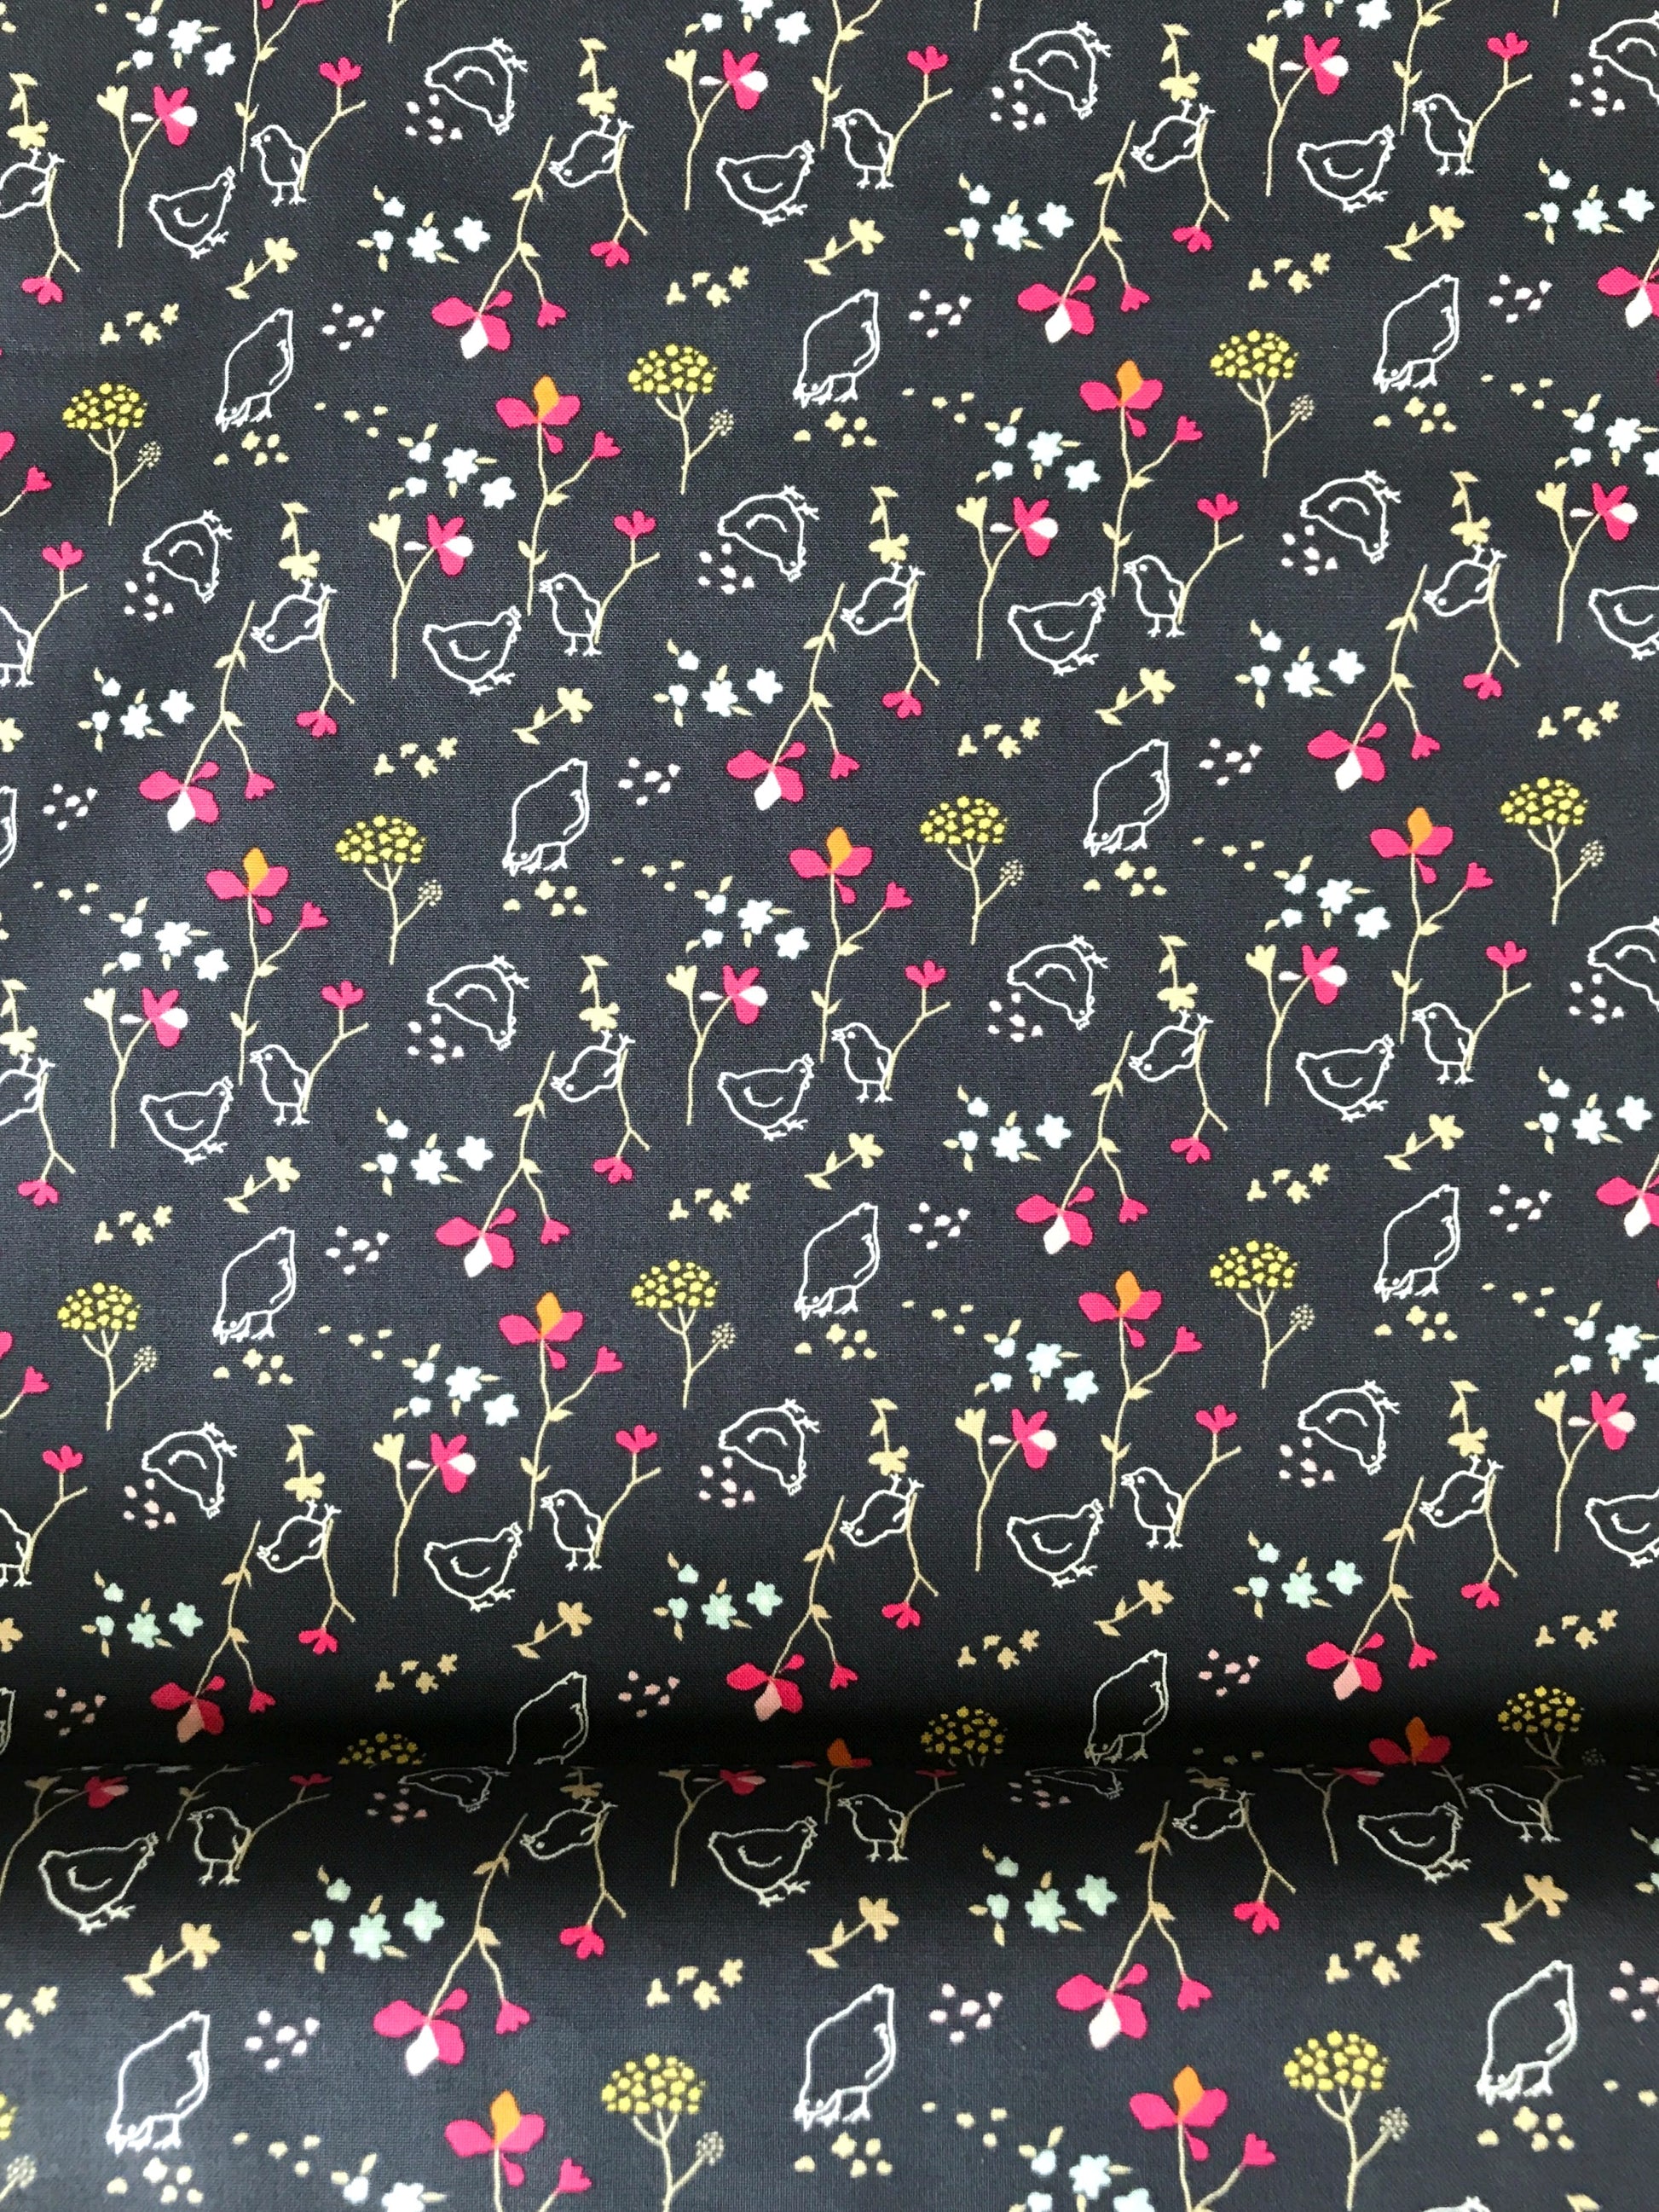 Riley Blake Fabric - Minki Kim - Someday - Chickens Navy - Quilters Cotton